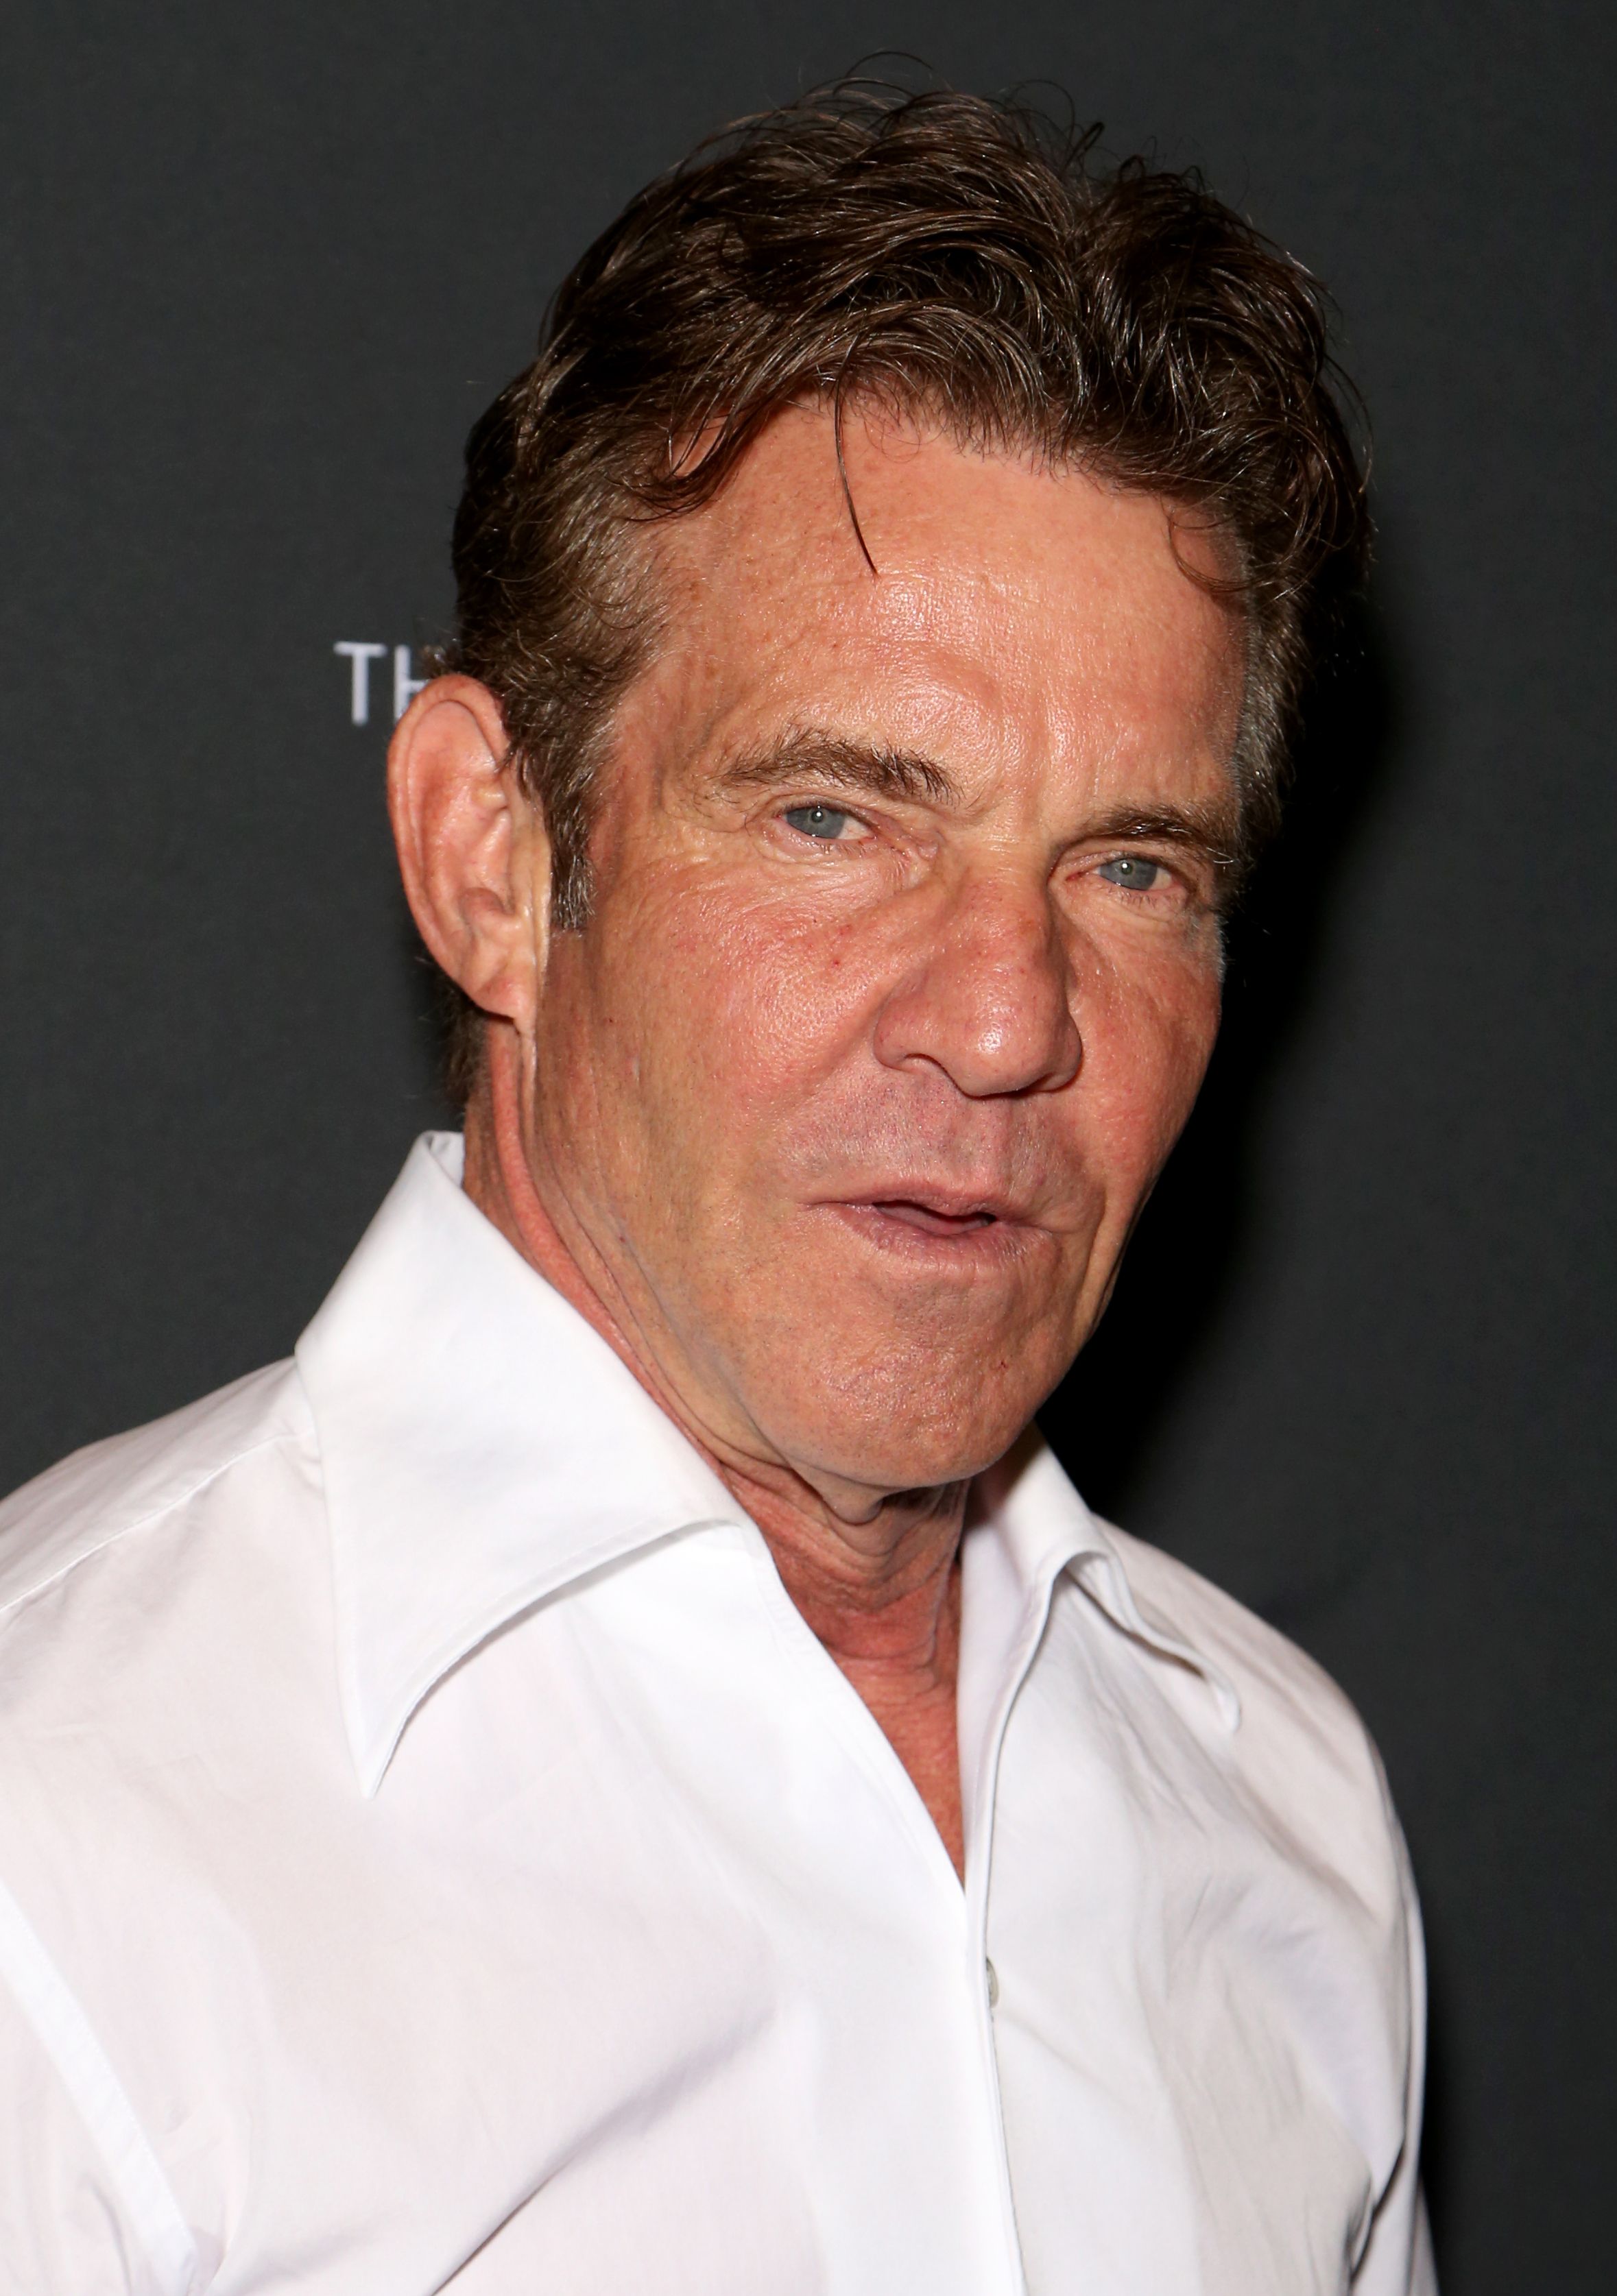 Dennis Quaid besucht "Dennis Quaid and The Sharks at The Barbershop Cuts & Cocktails at The Cosmopolitan" in Las Vegas am 11. Mai 2019. | Quelle: Getty Images